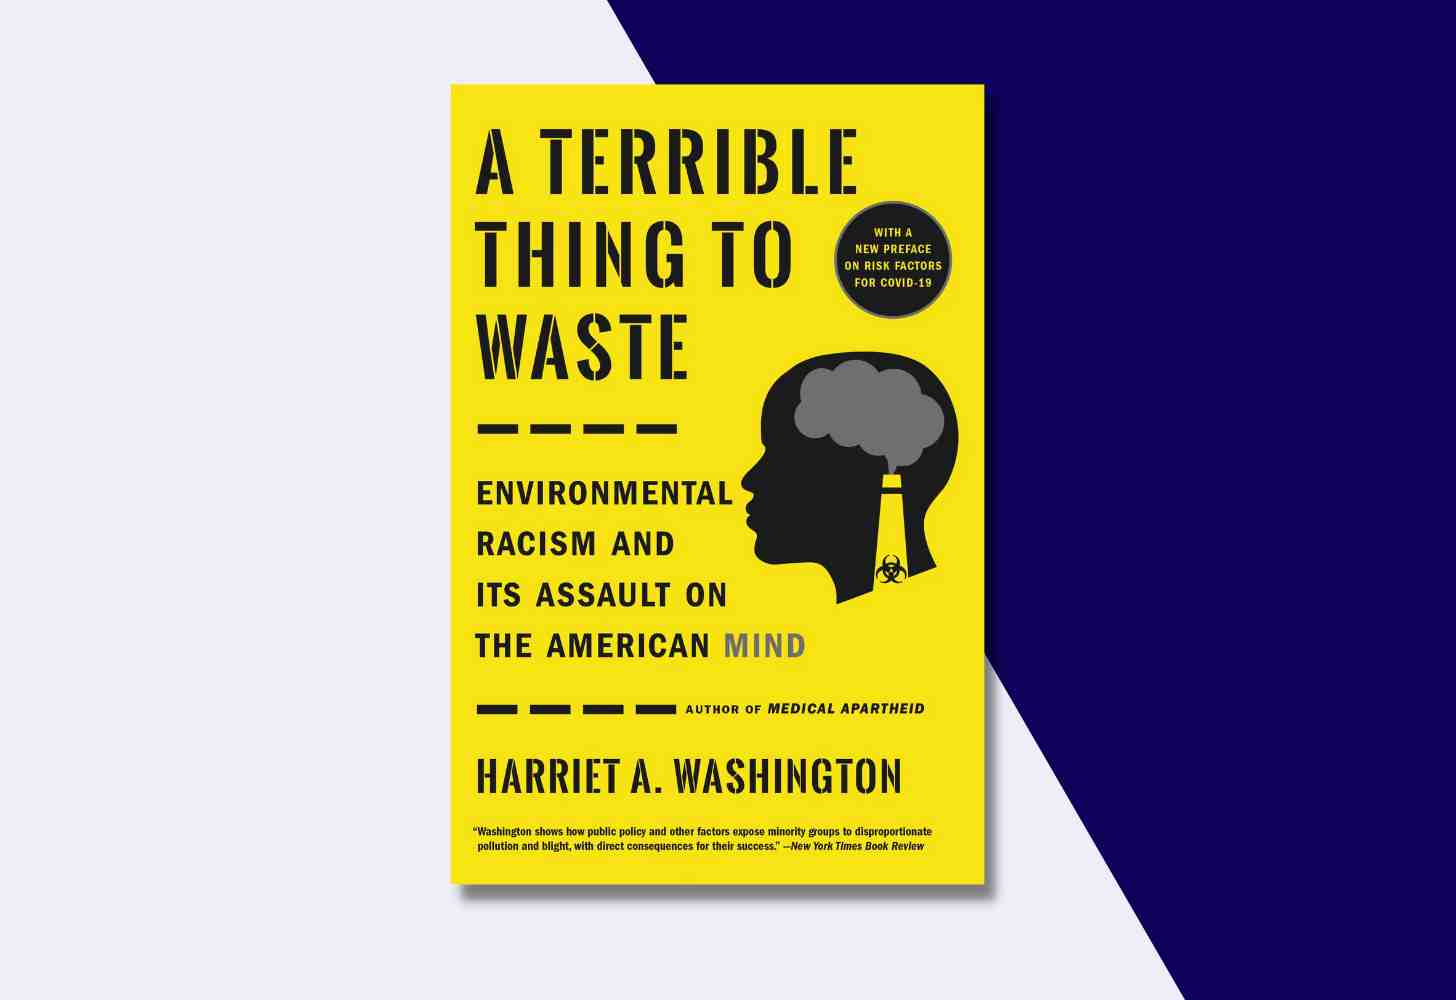 The Cover Of: “A Terrible Thing To Waste: Environmental Racism and its Assault on the American Mind” by Harriet A. Washington